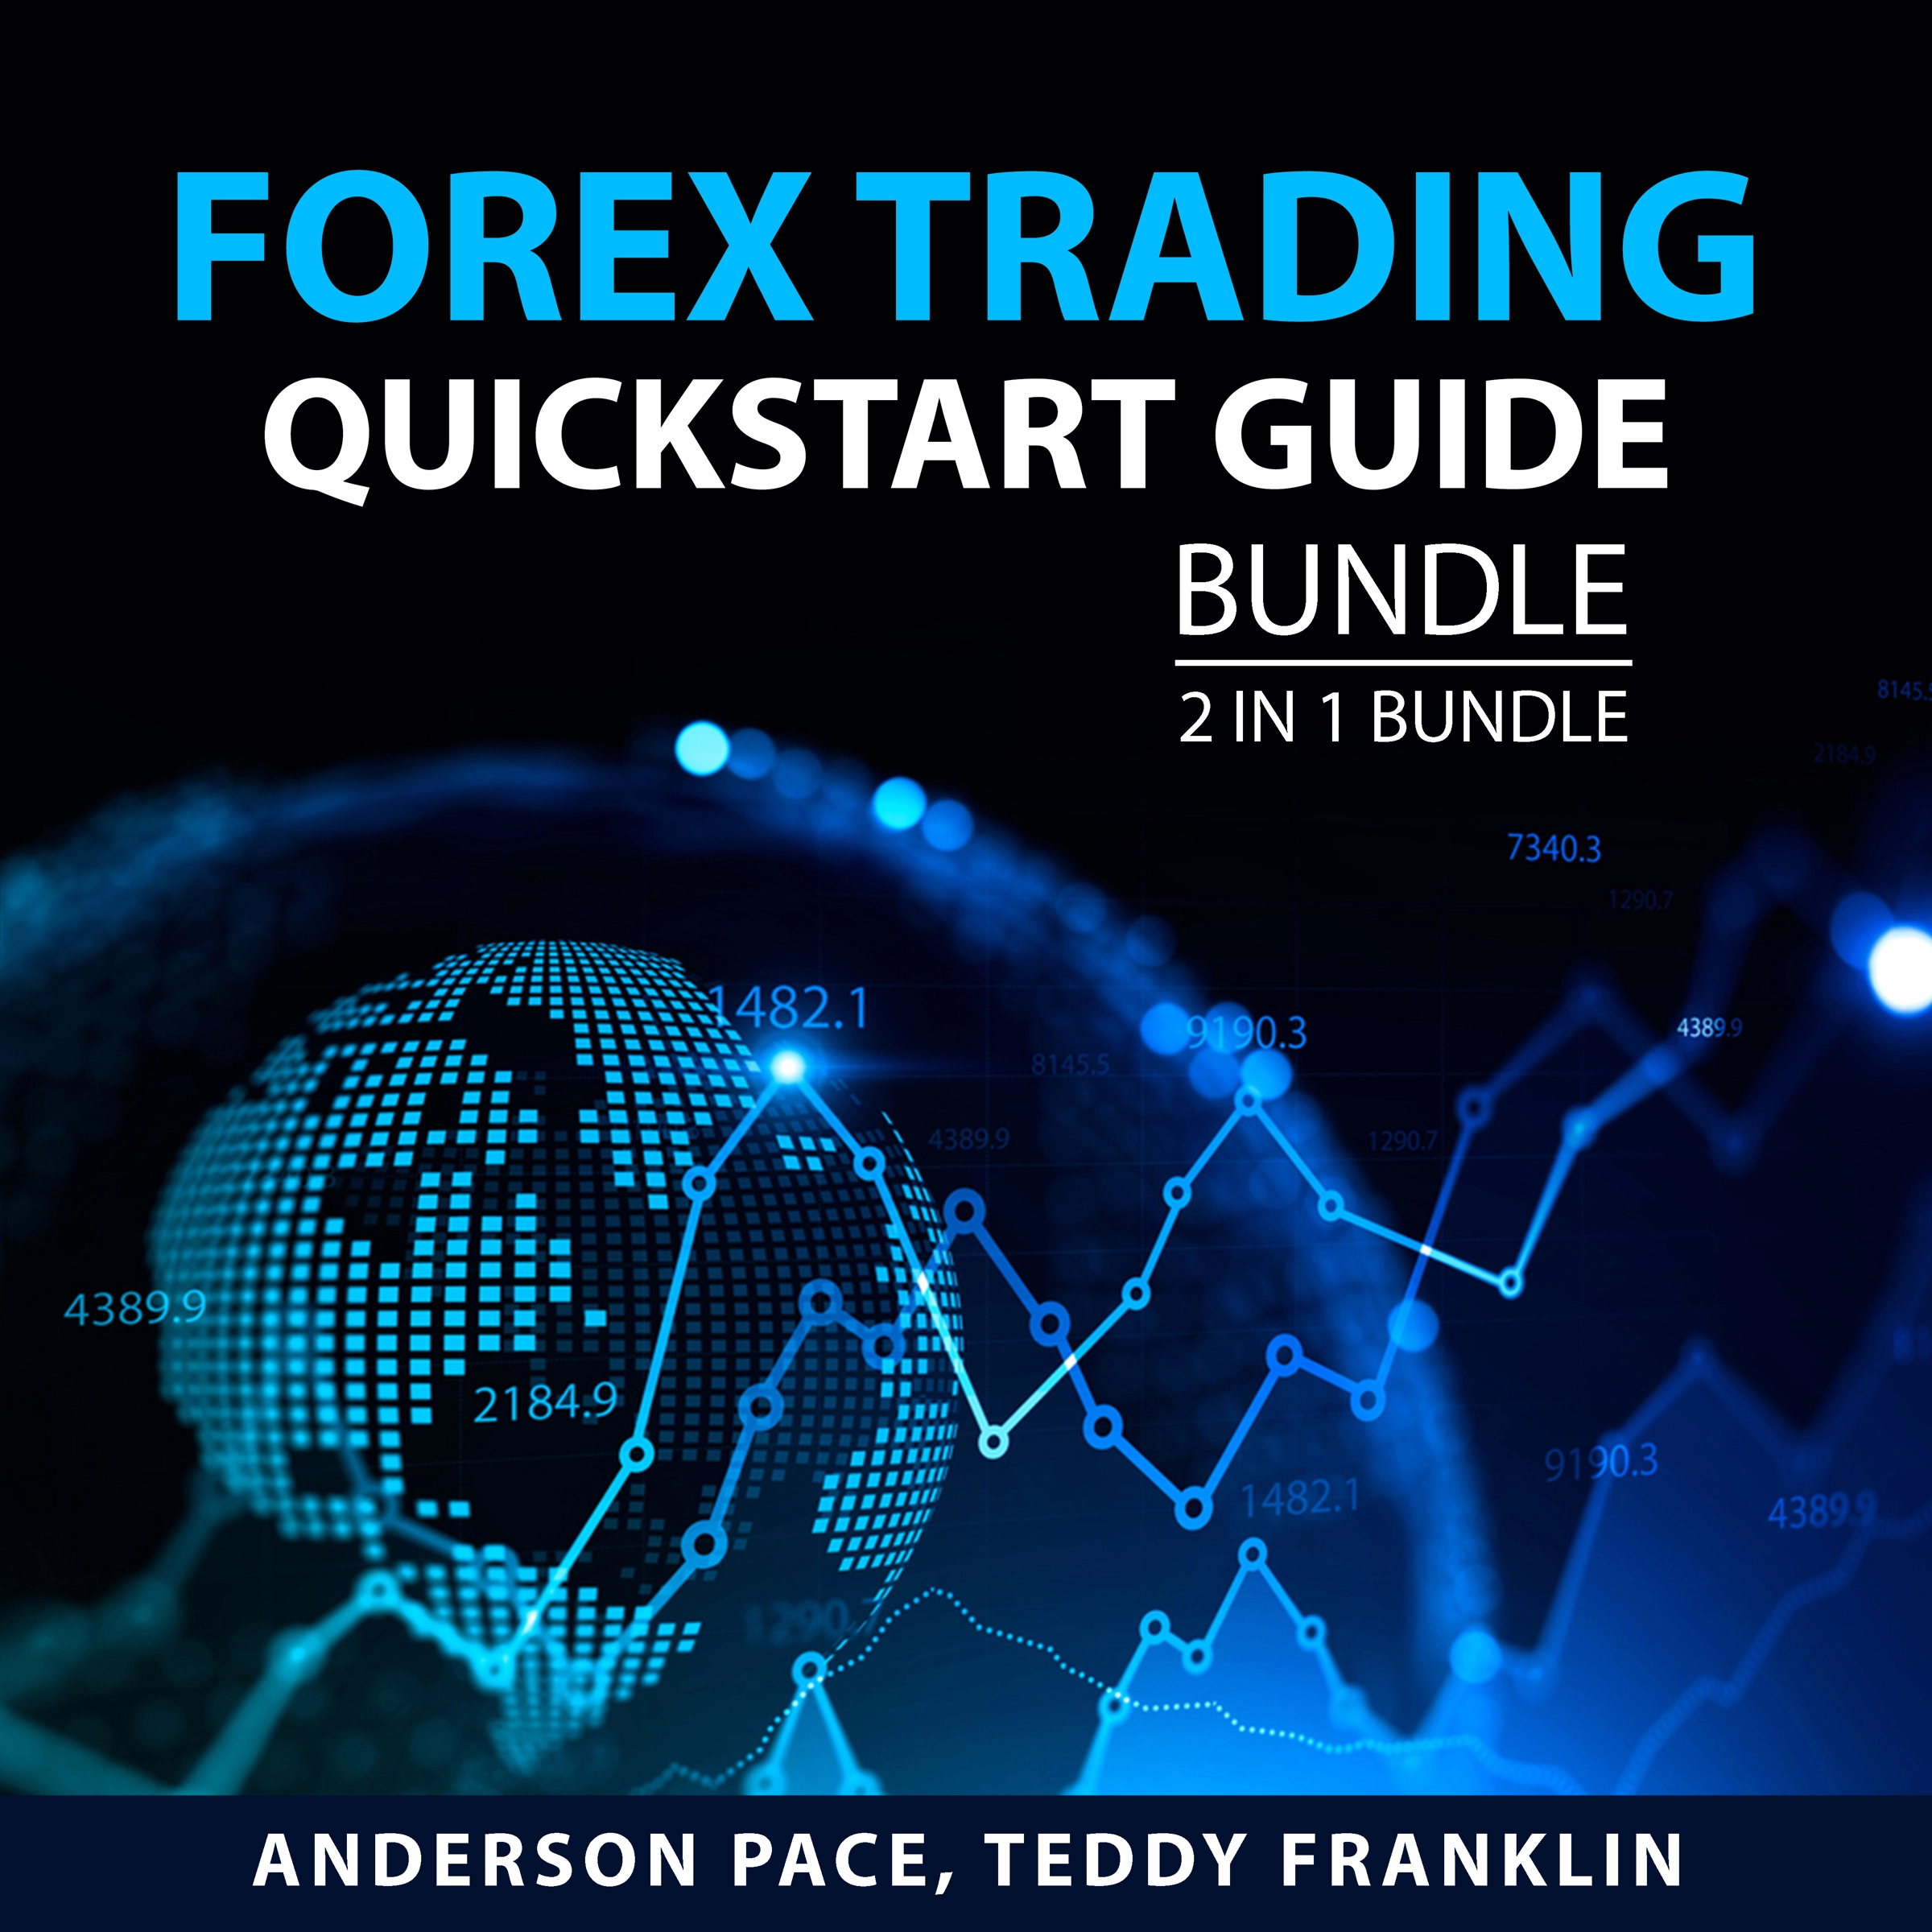 Forex Trading Quickstart Guide Bundle, 2 in 1 Bundle: by Teddy Franklin Audiobook